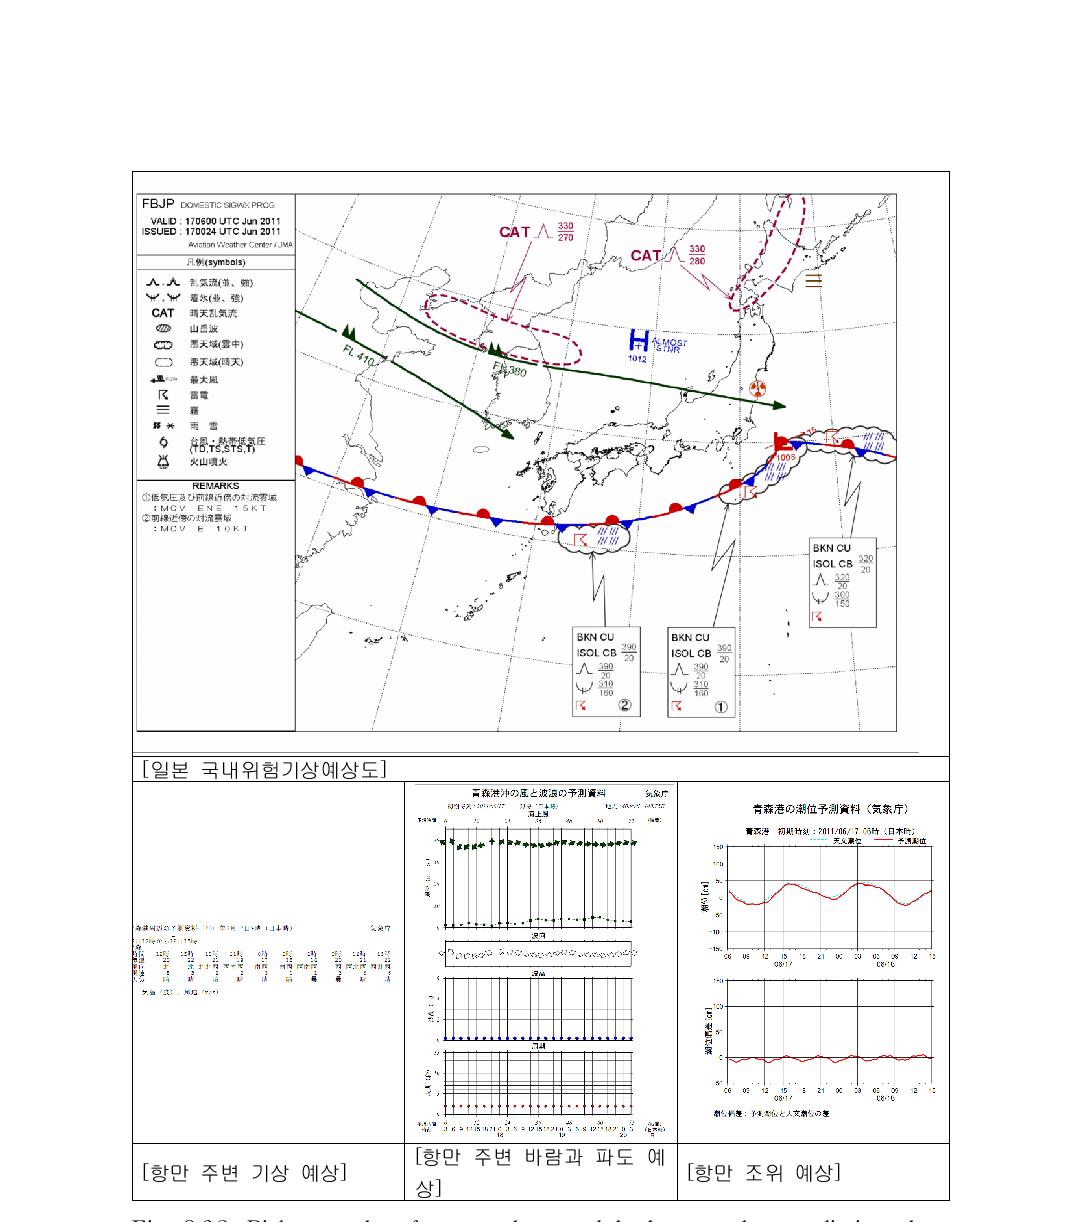 Risky weather forecast chart and harbor weather prediction chart provided by the JMA.